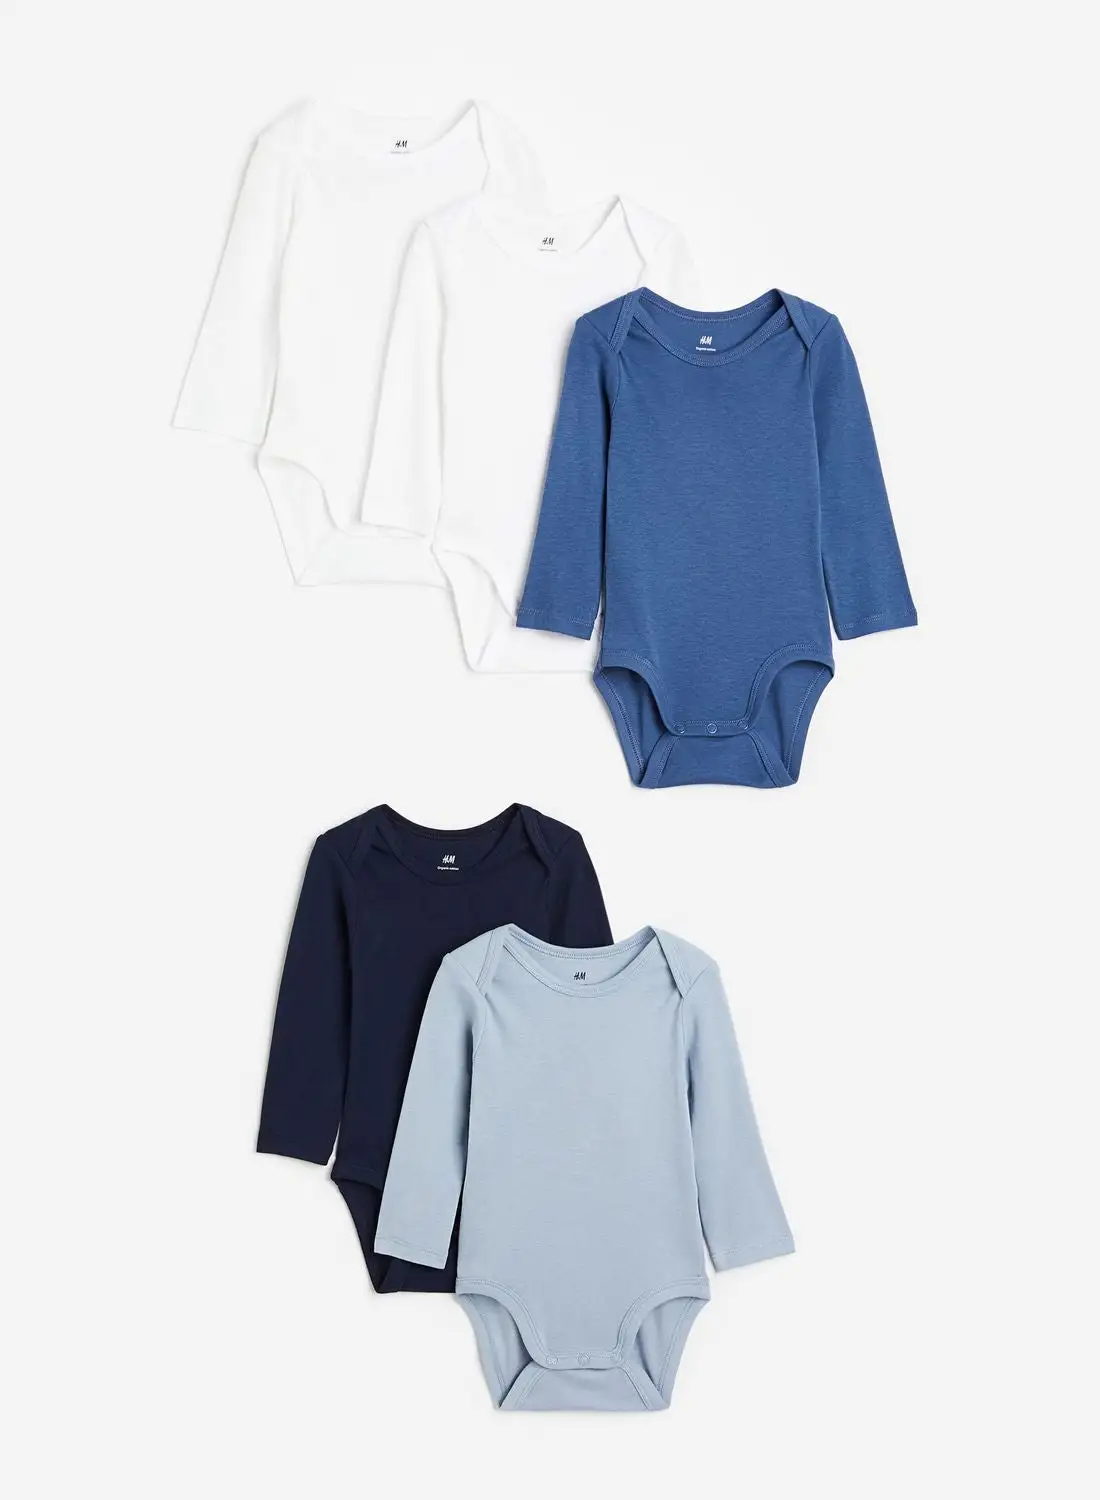 H&M Kids 5 Pack Assorted Bodysuits